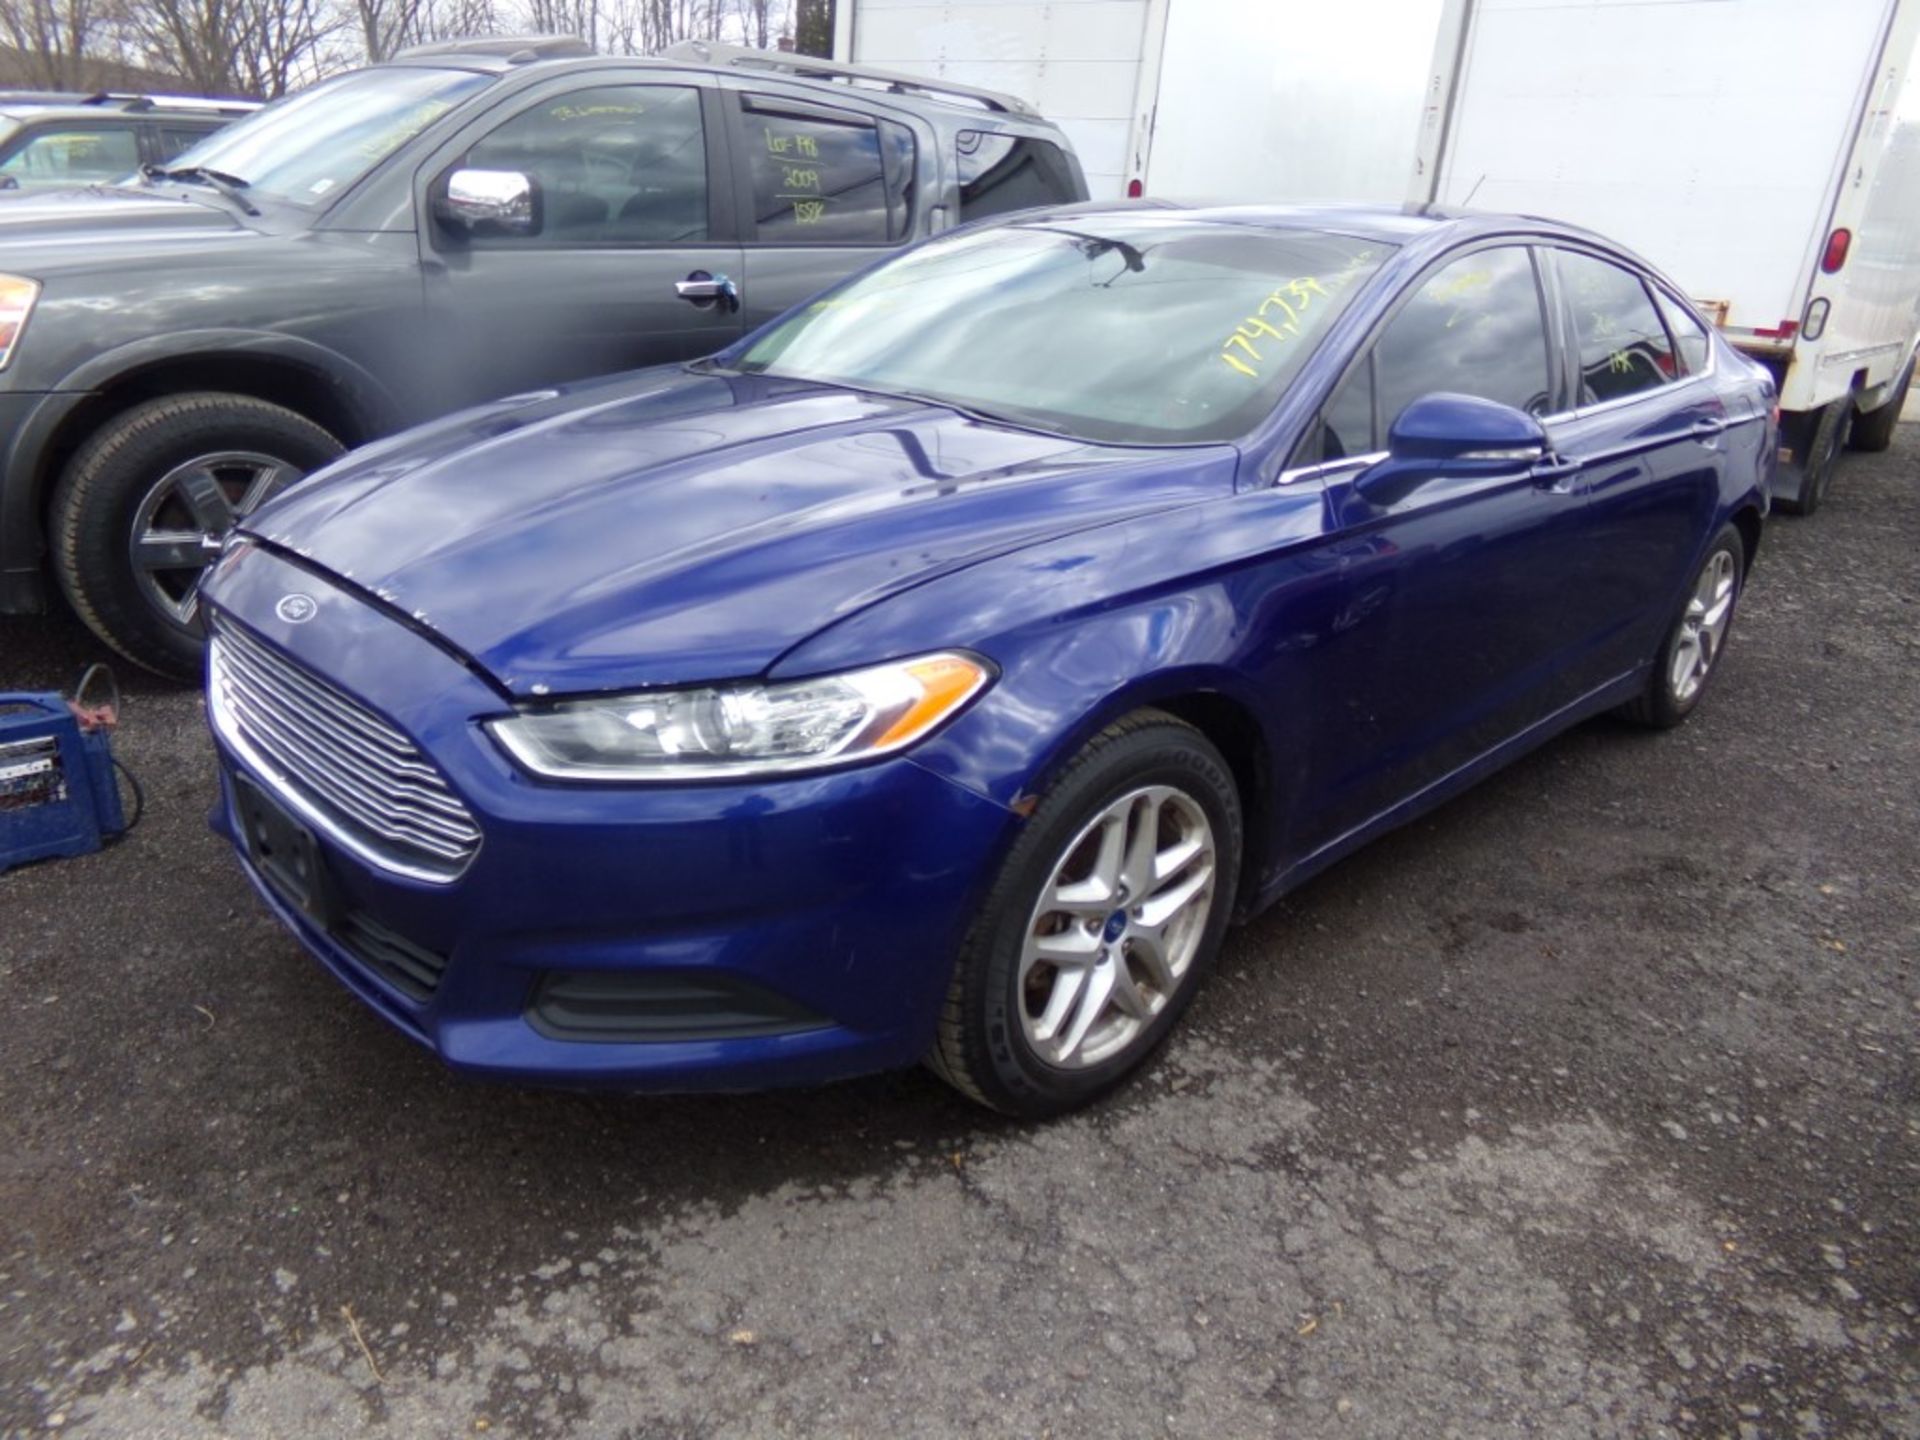 2014 Ford Fusion SE, Blue, 174,739 Miles, VIN#1FA6P0H7XE5365423, AIR BAG LIGHT IS ON, MINOR DAMAGE